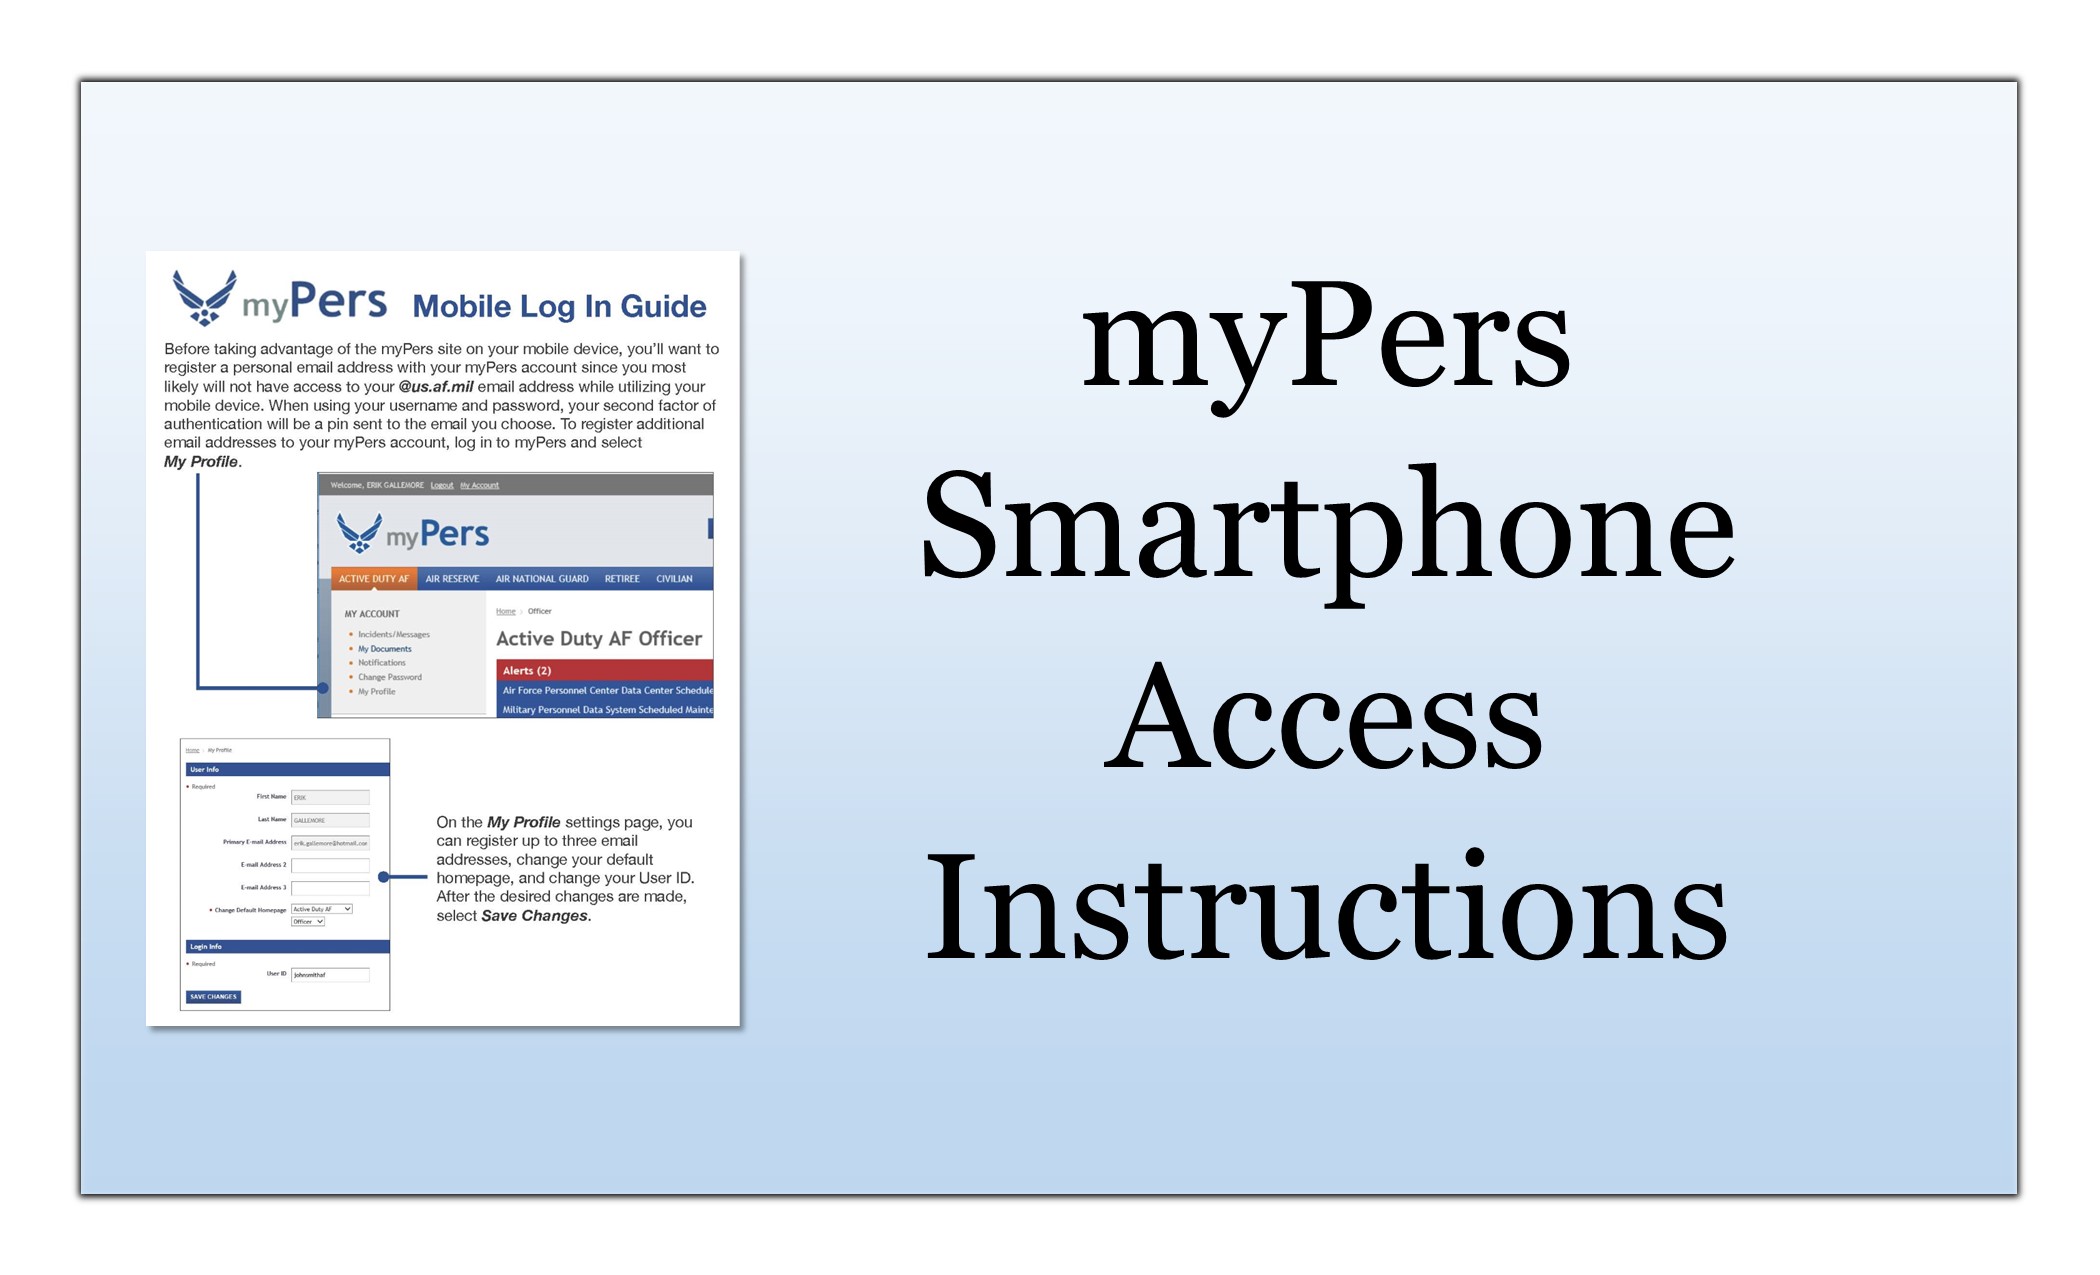 myPers Smartphone Access Instructions thumbnail link